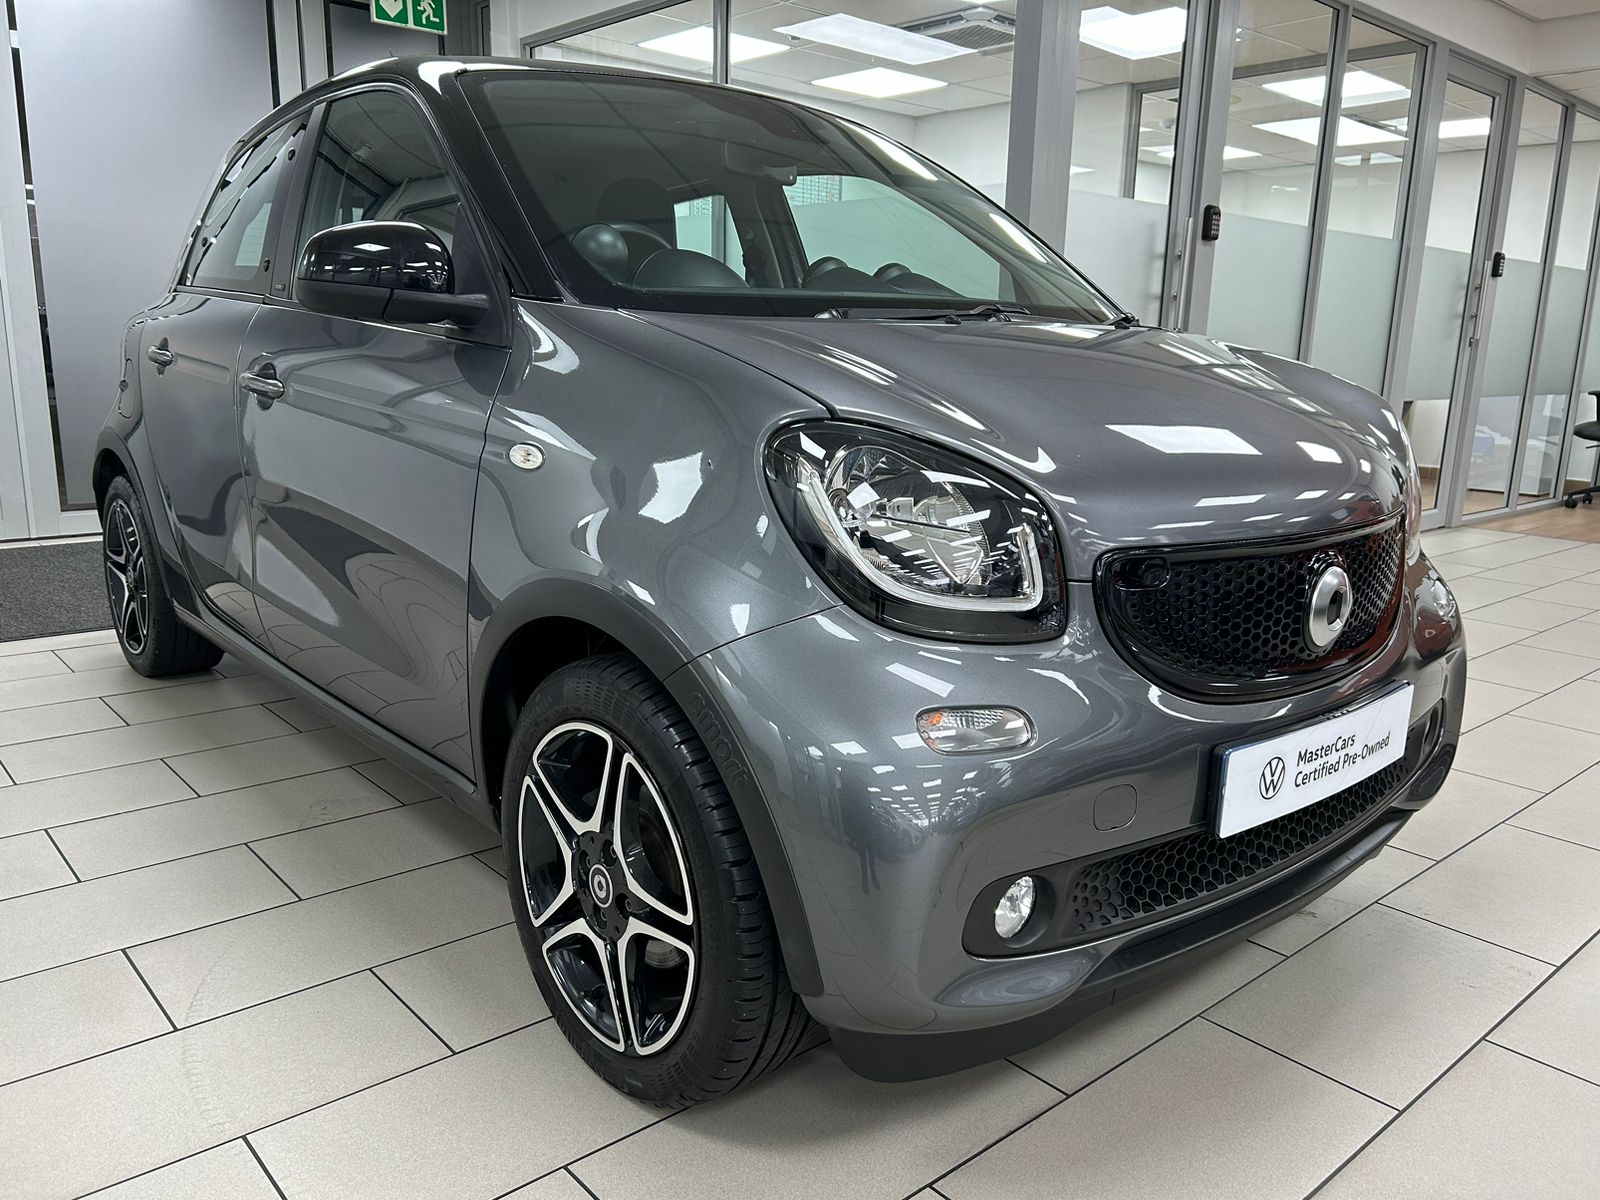 2017 Smart ForFour  for sale - 087345